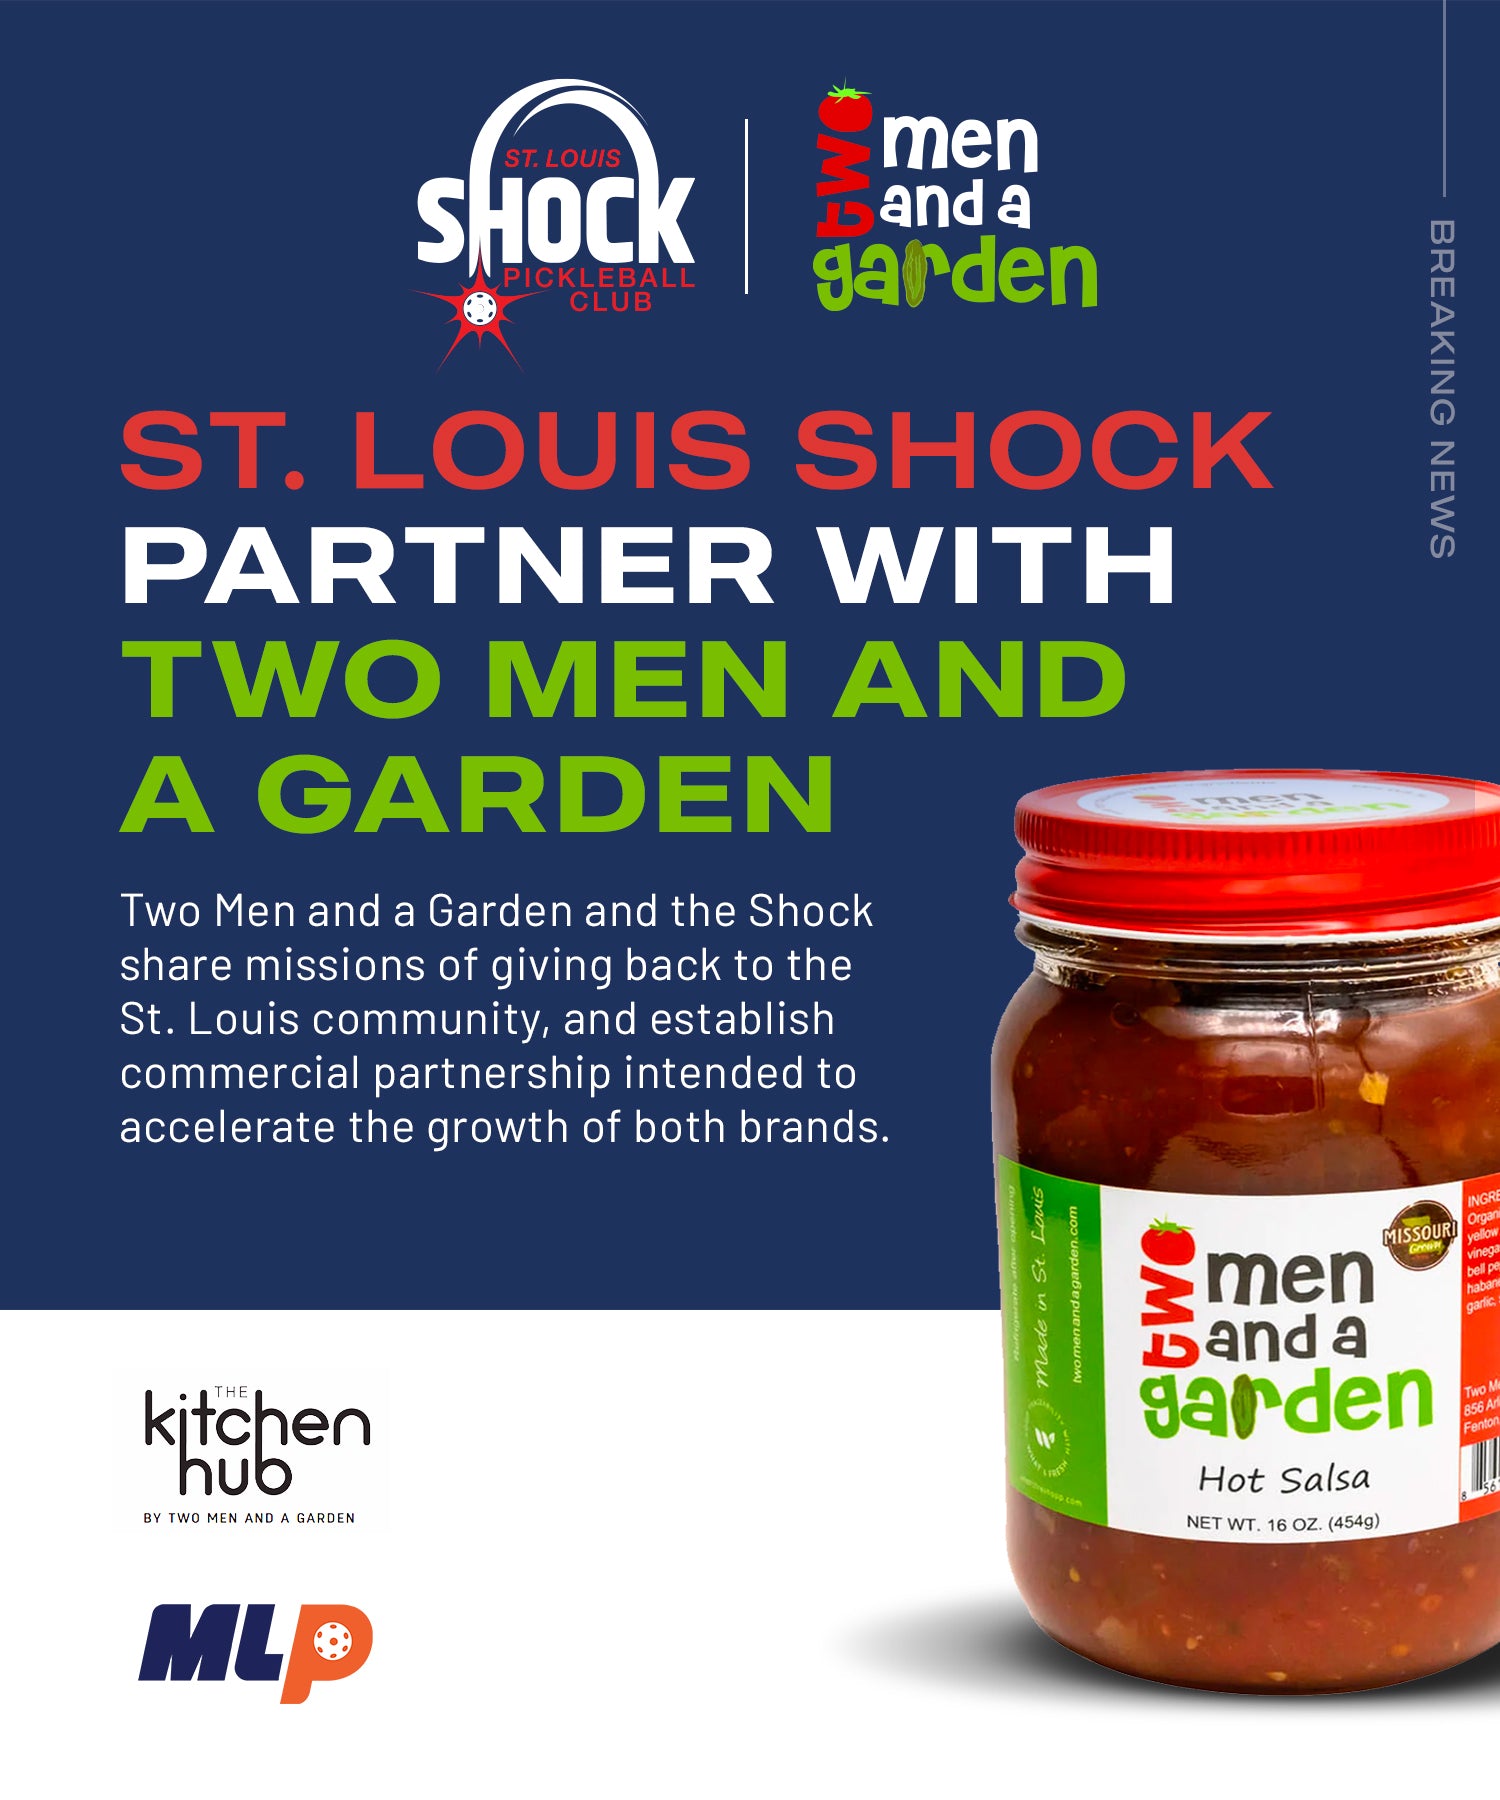 ST. LOUIS SHOCK AND TWO MEN AND A GARDEN ESTABLISH COMMERCIAL PARTNERSHIP